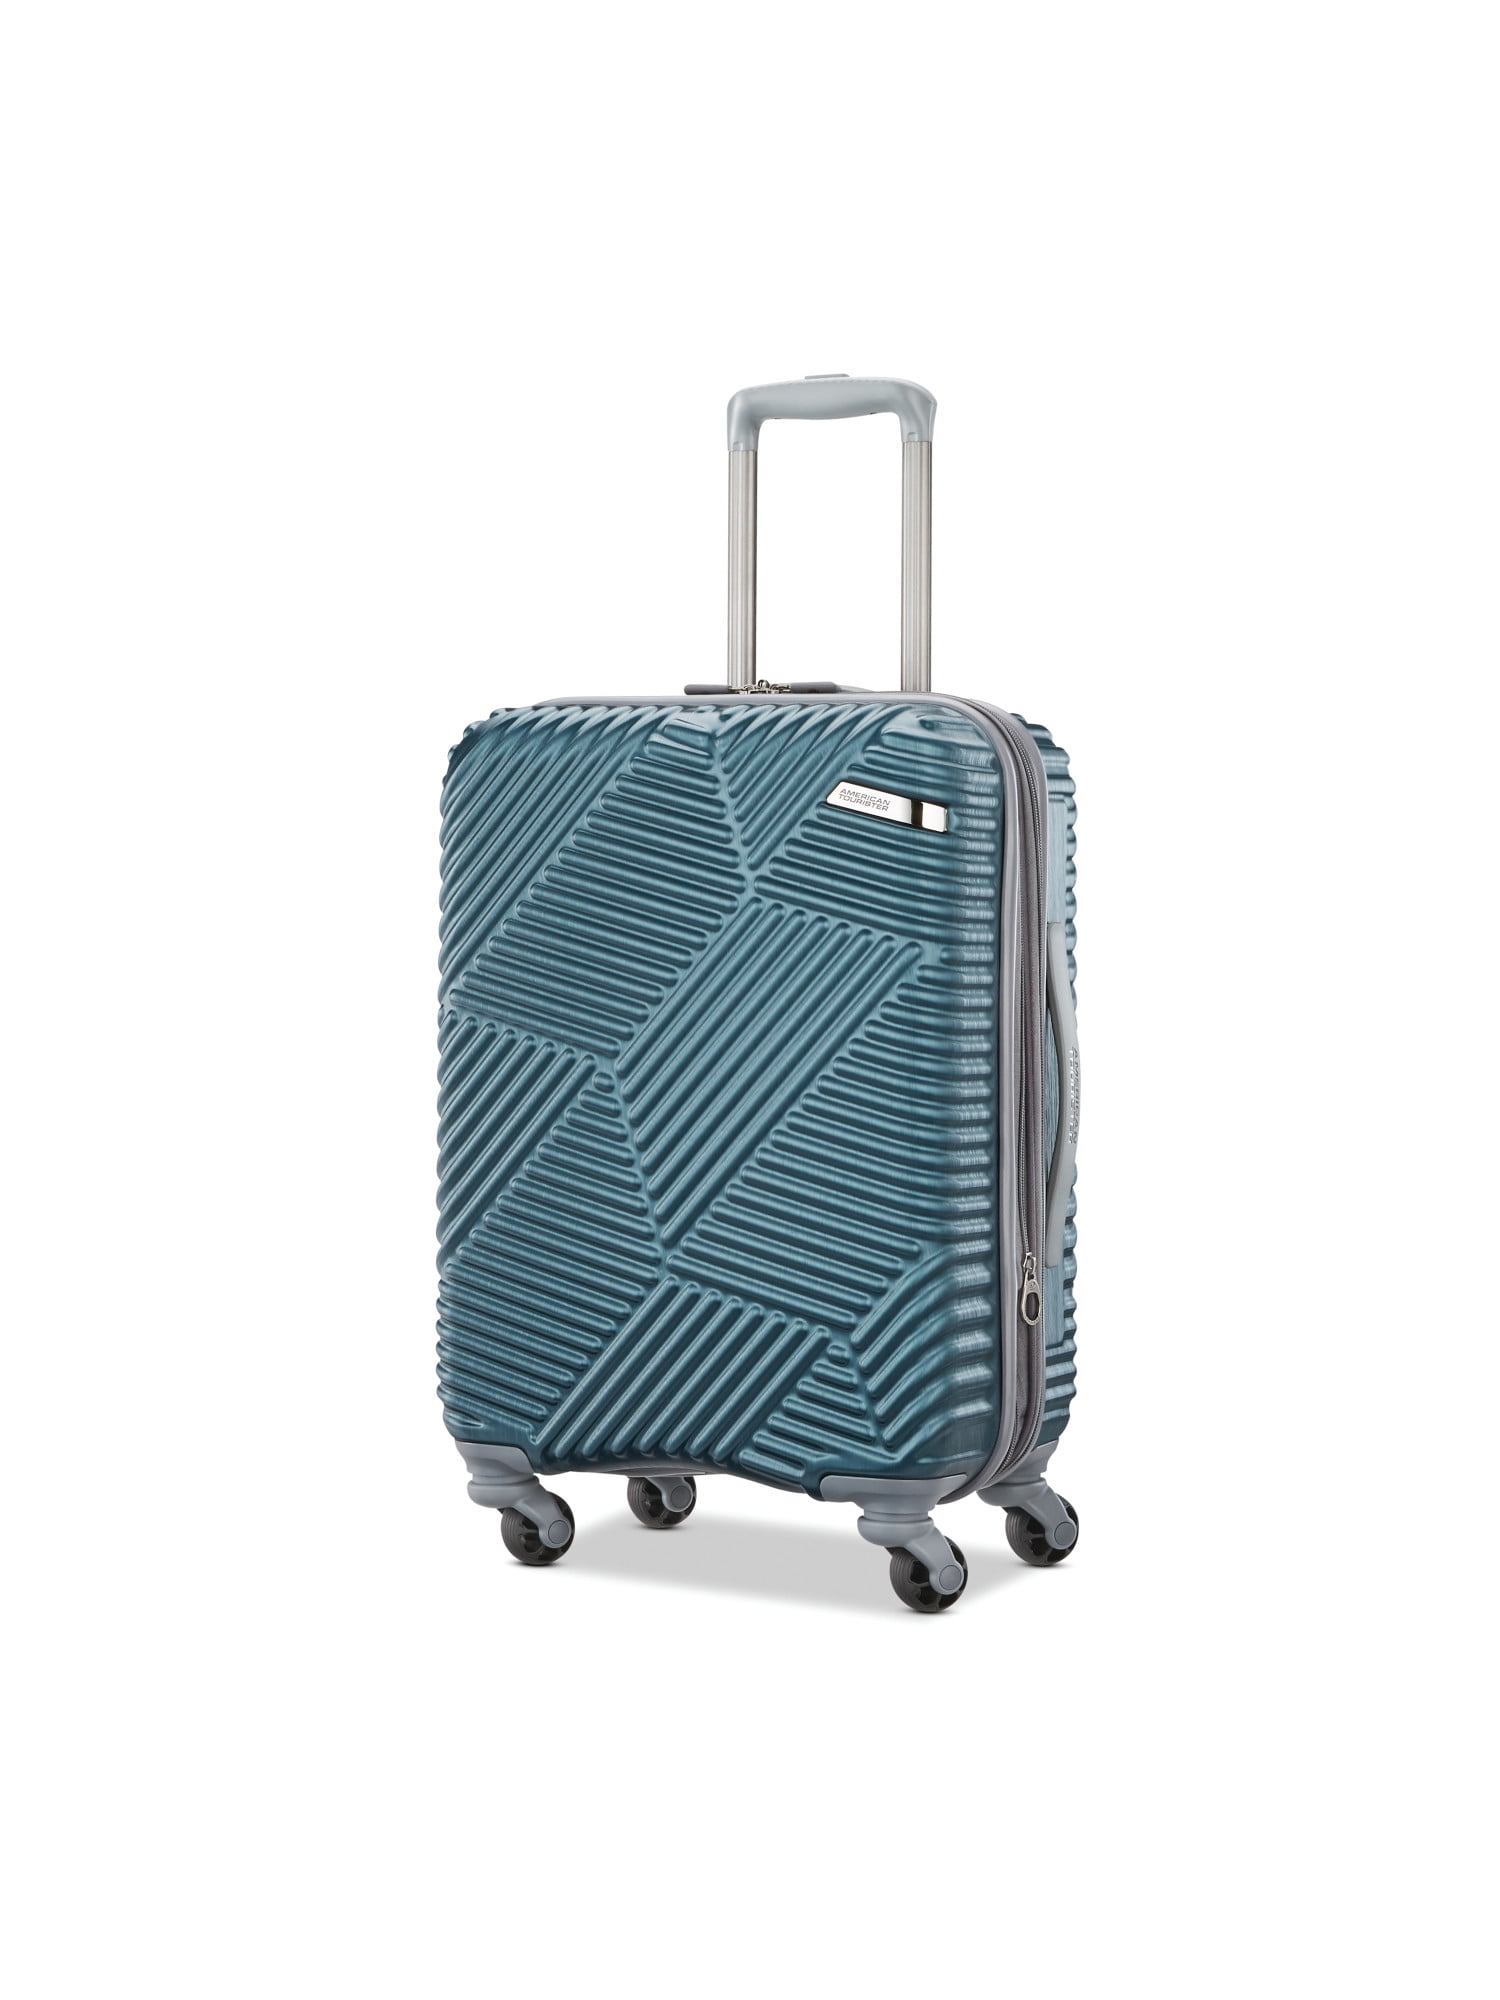 American Tourister Airweave Hardside Spinner, 20-Inch Carry-On Luggage, One  Piece - Walmart.com